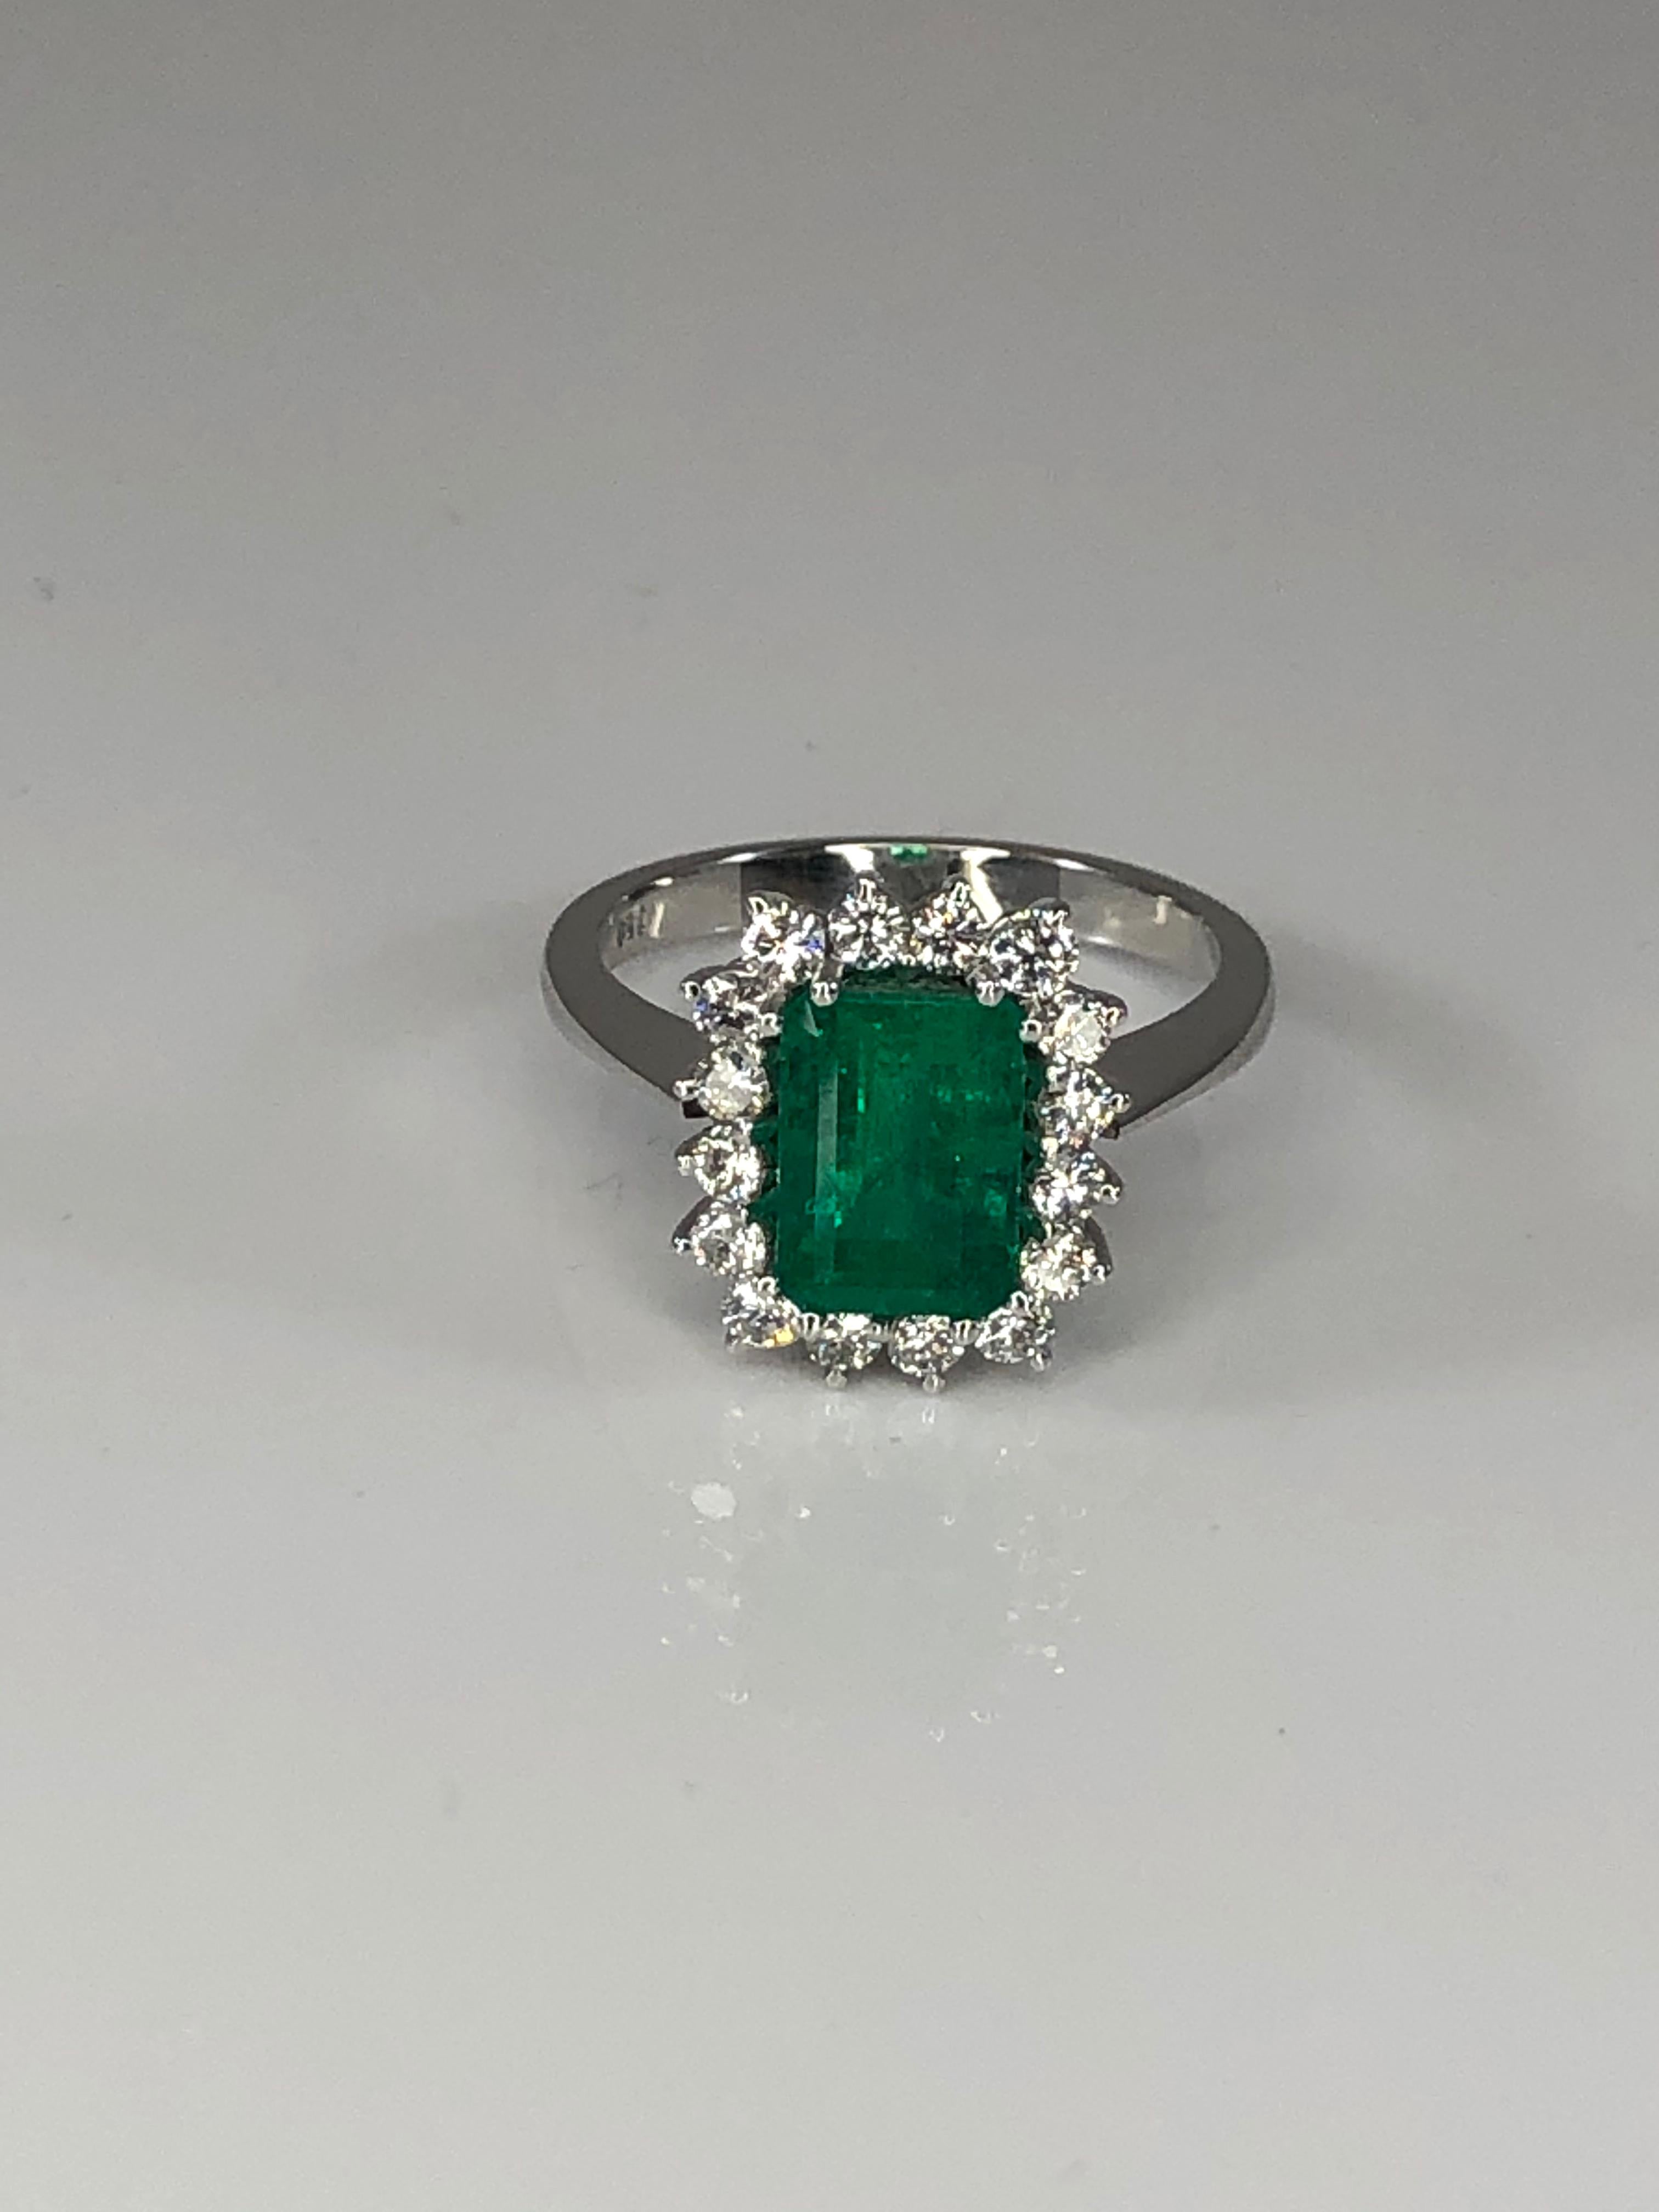 S.Georgios designer classic rosette emerald cut natural emerald with diamonds around. This gorgeous ring is handmade from 18 Karat White gold in Athens Greece and features a 1.95 Carat Natural Emerald accompanied by Brilliant-cut White Diamonds